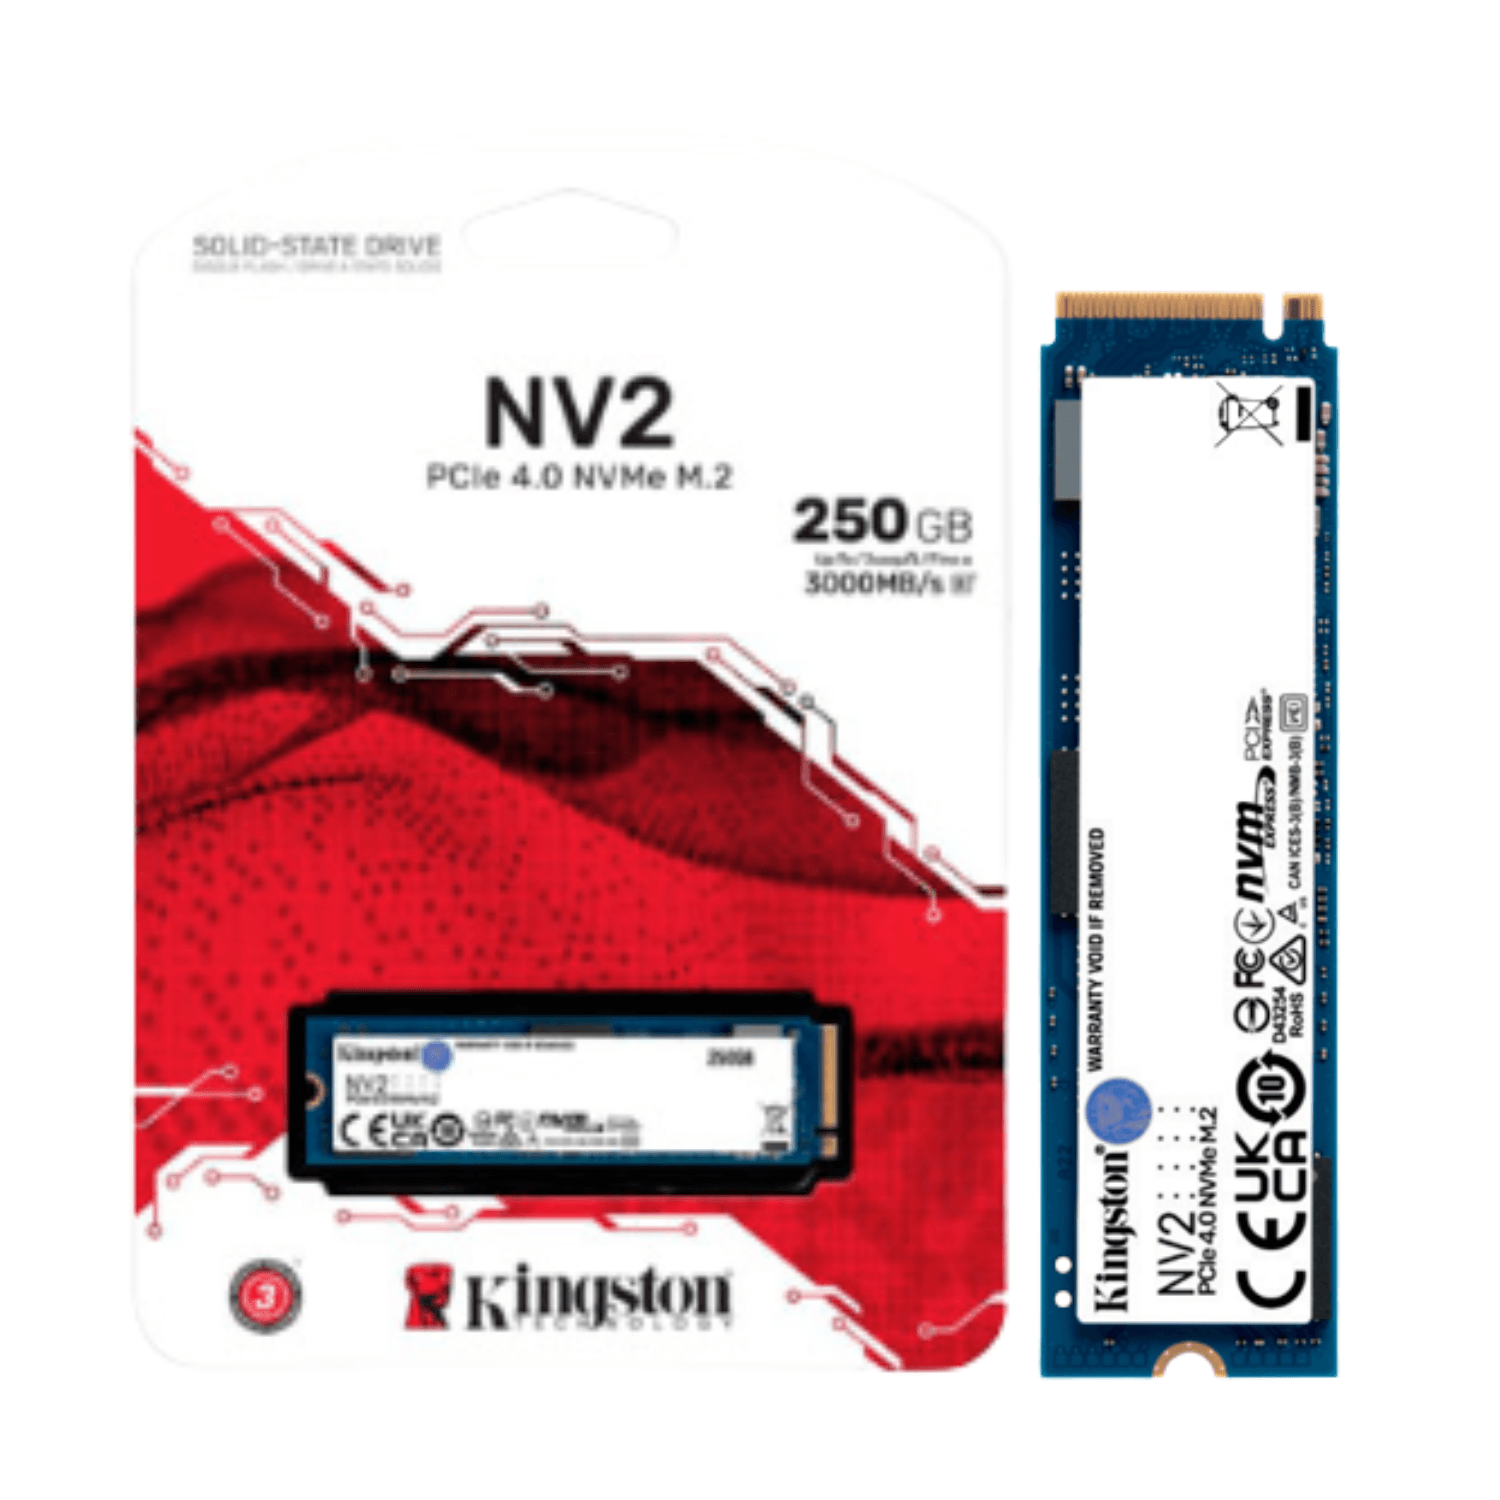 Disco Duro Solido Kingston M.2 PCle 4.0 Nvme 250Gb Snv2s/250g